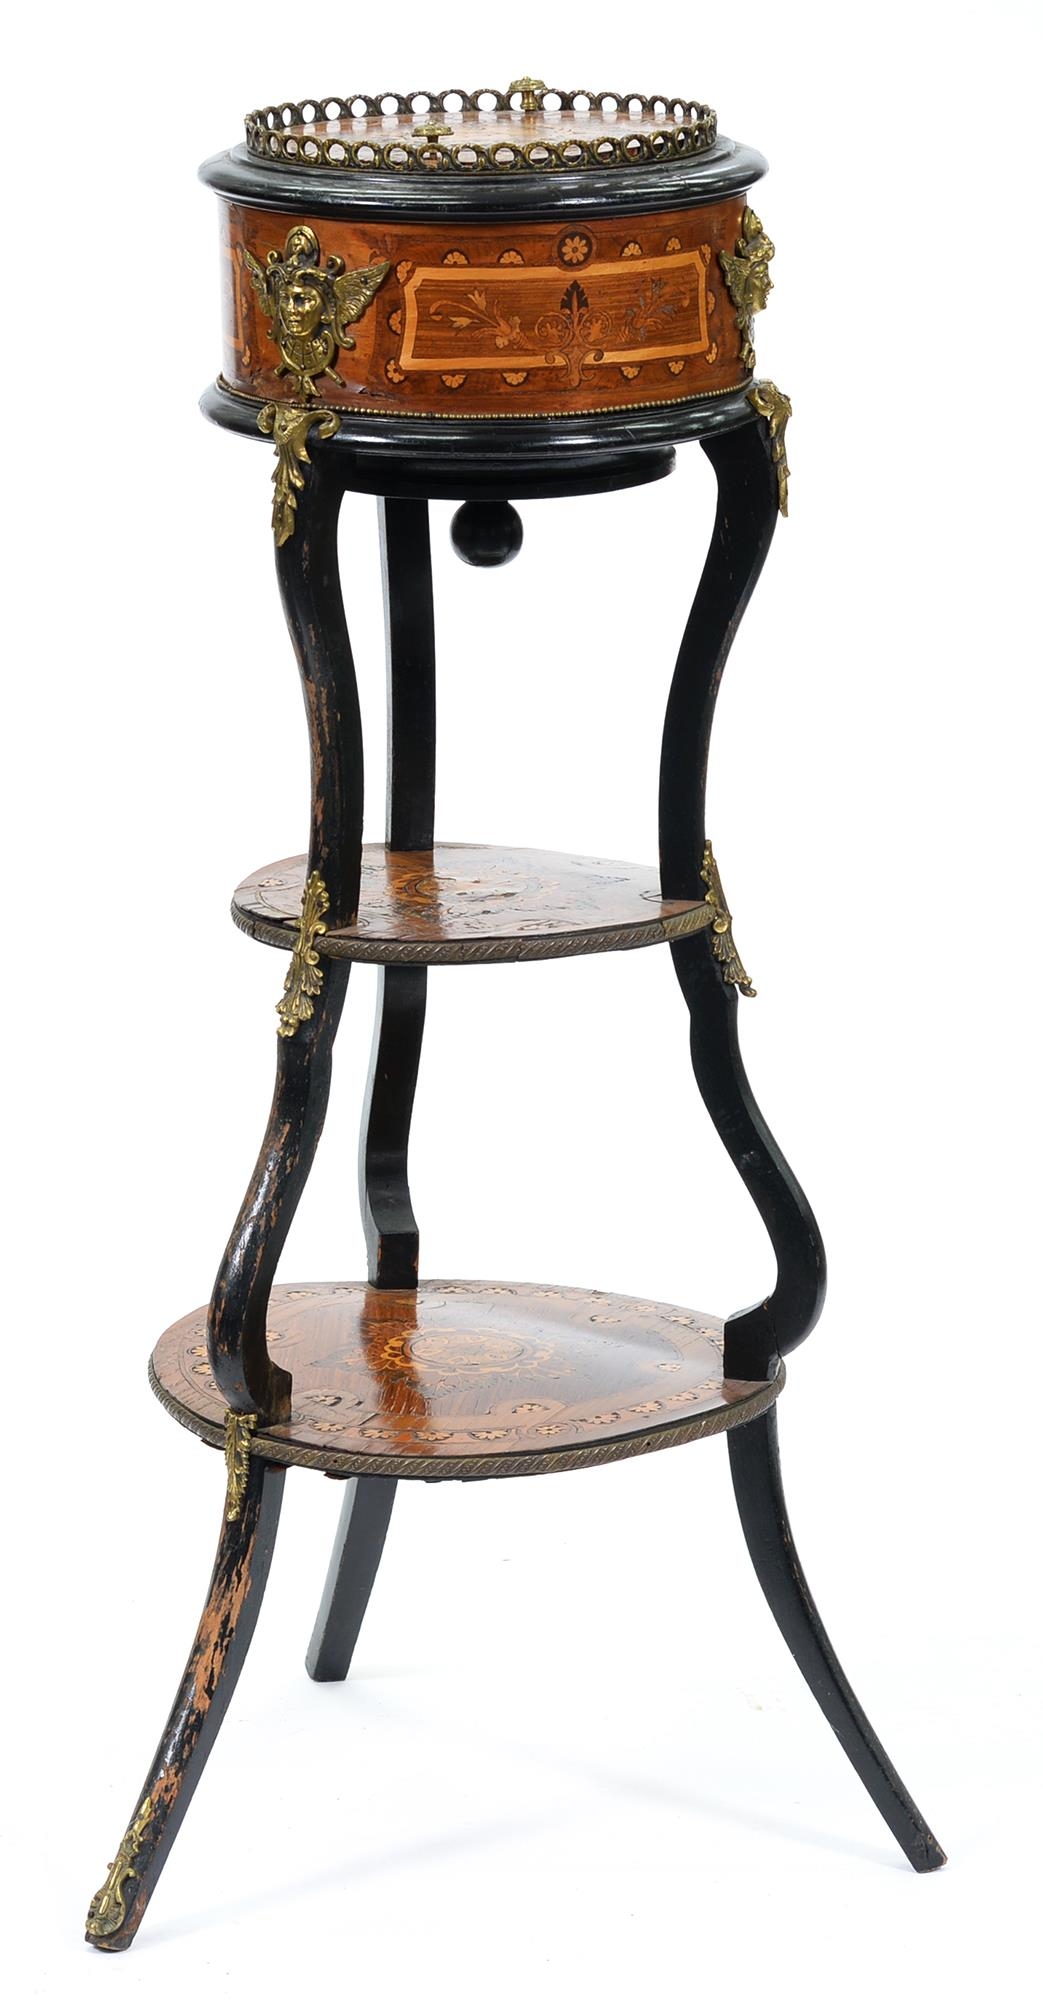 A French kingwood, marquetry and ebonised jardiniere, late 19th c,  with giltmetal mounts, the round